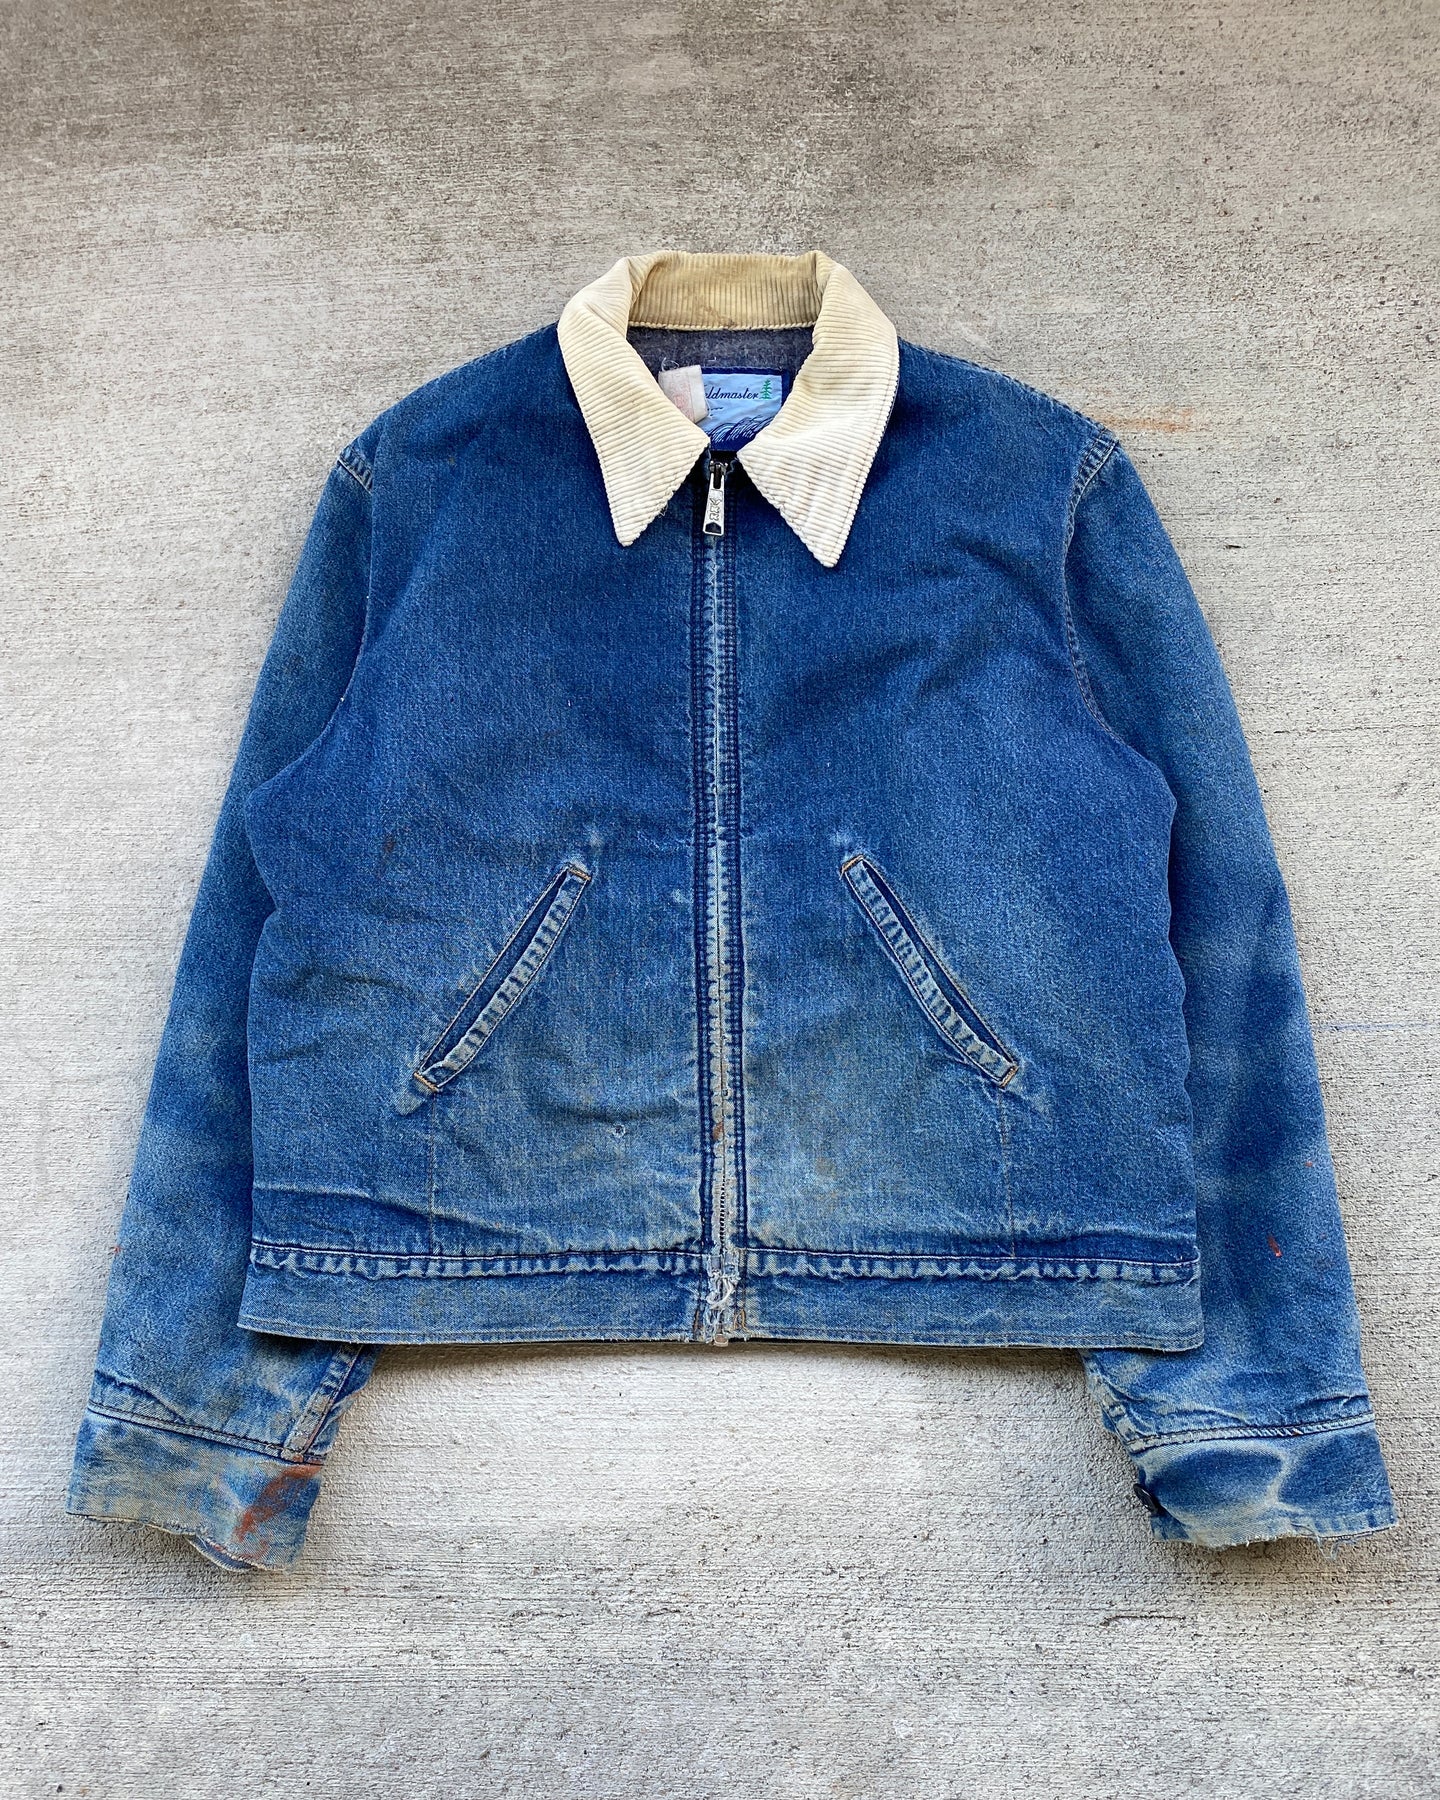 1970s/1980s Denim Work Jacket with Cropped Fit - Size Large